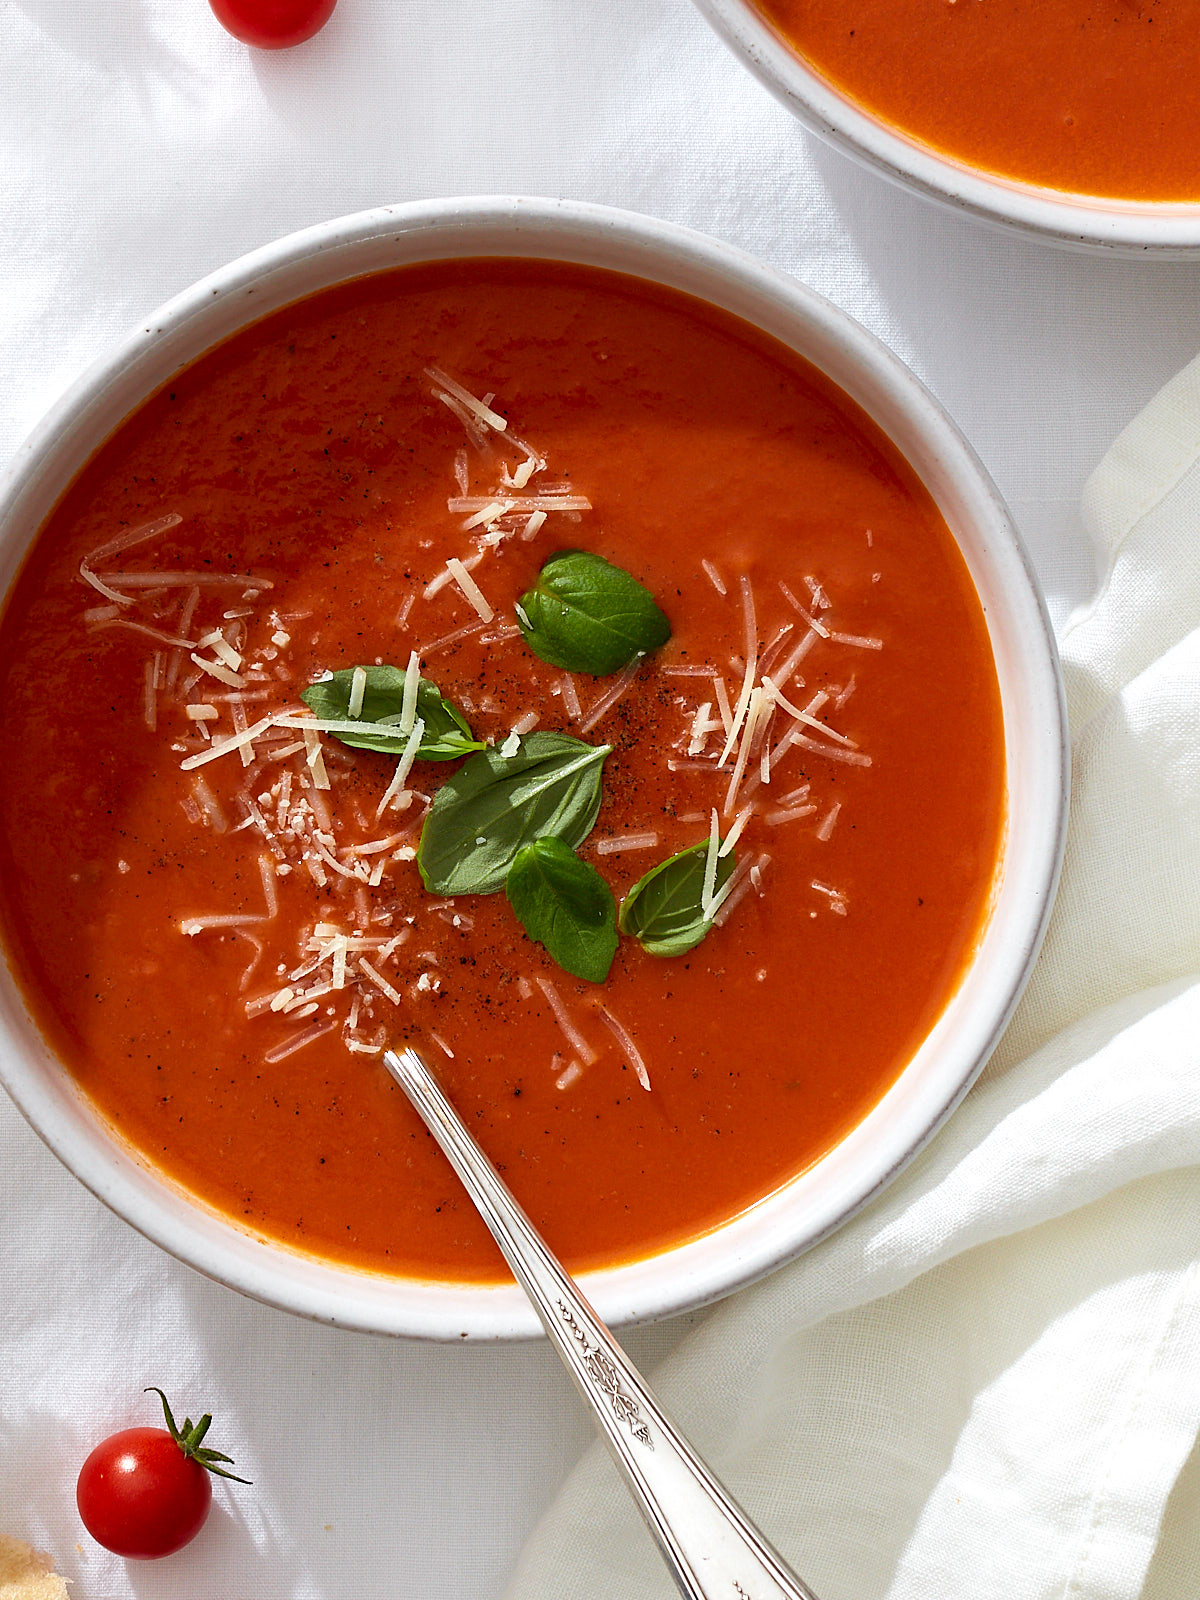 A bowl of homemade roasted tomato soup with cracked black pepper, fresh basil leaves, and grated parmesan on a white linen table.